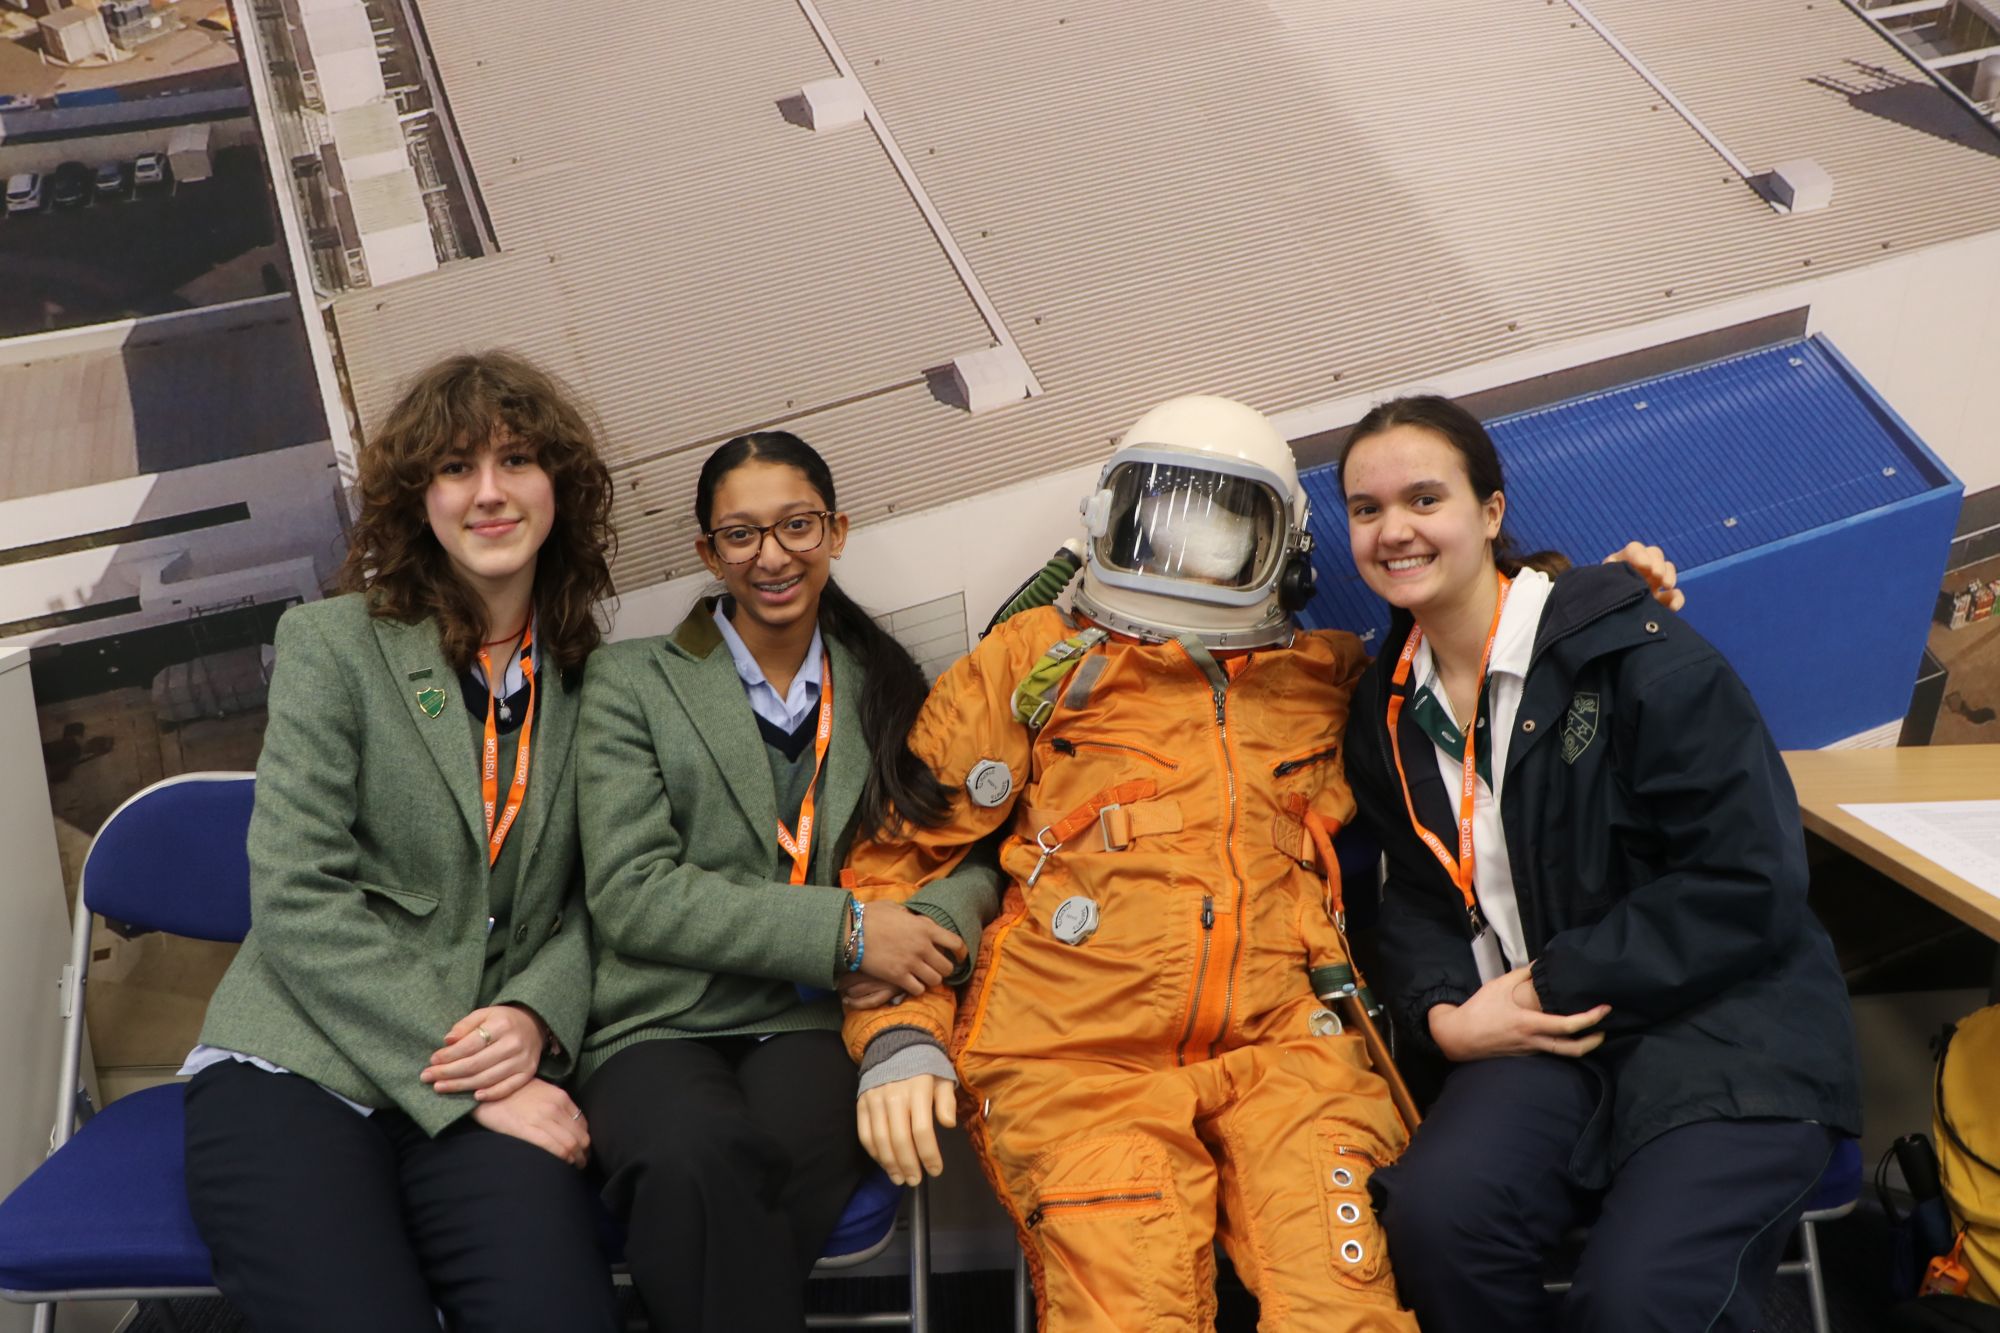 Three CLC students sit next to a dummy wearing an orange space outfit